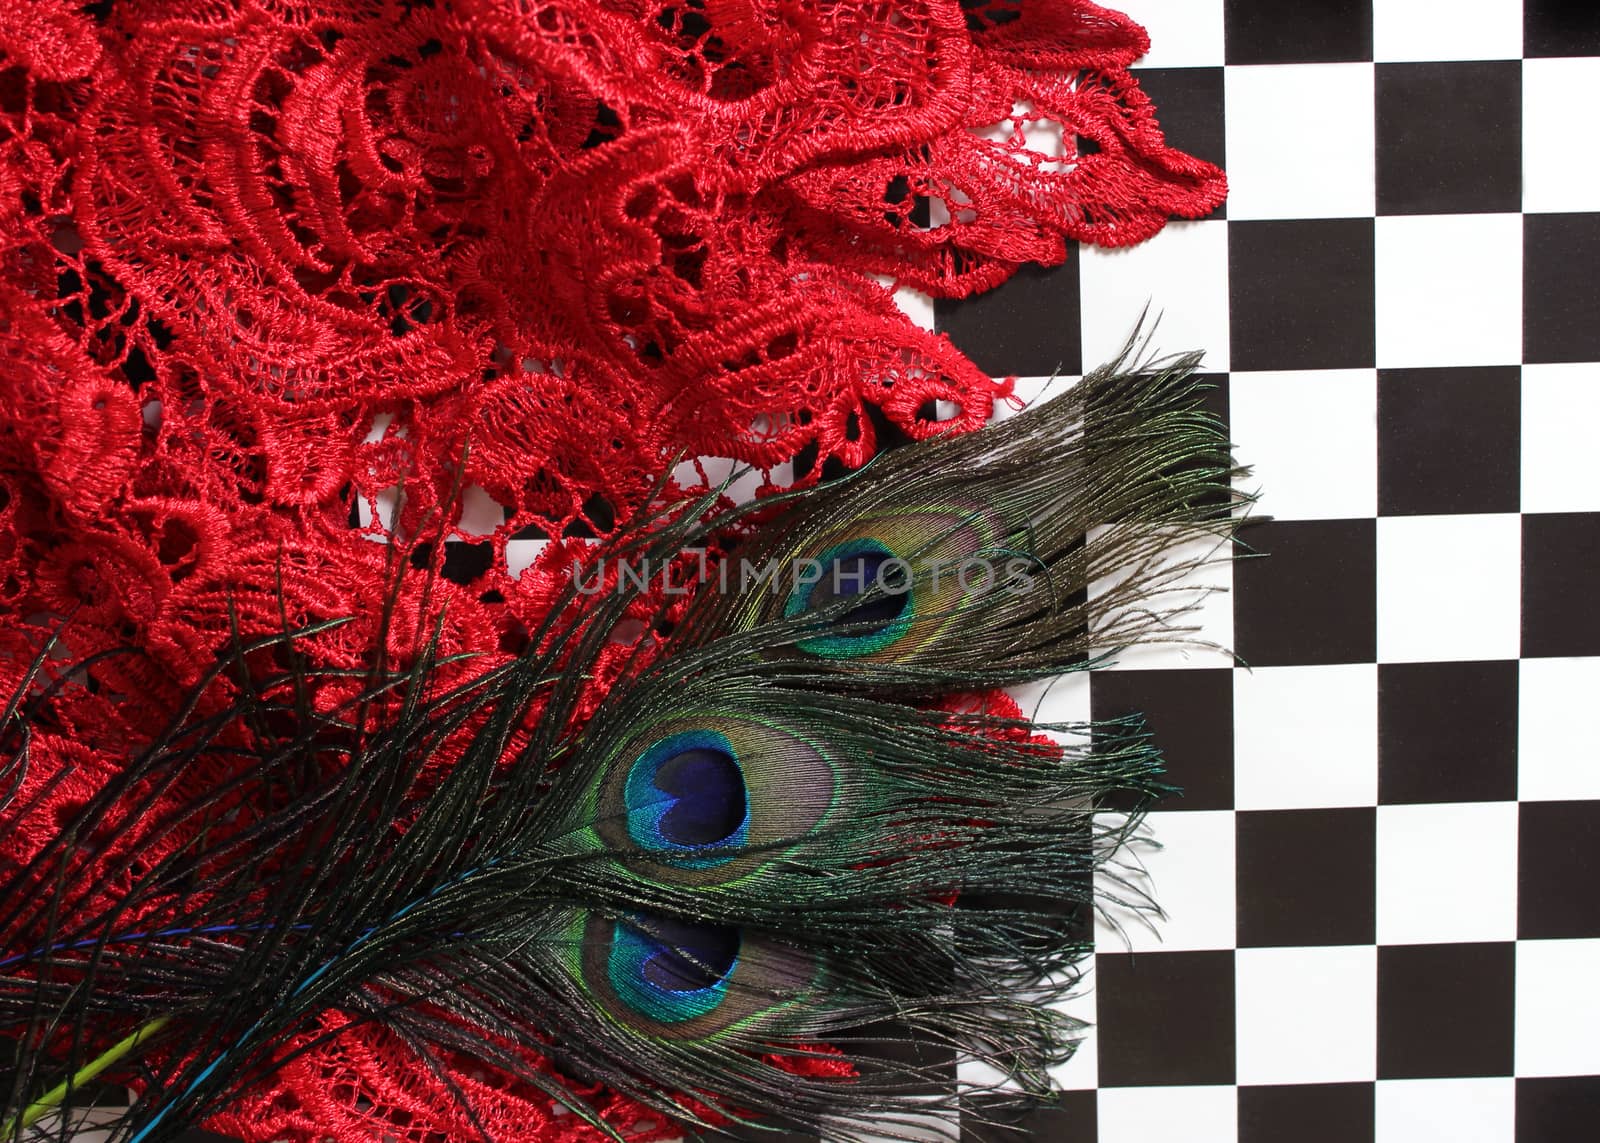 Red Lace and Peacock Feathers on Black and White Checkerboard by Marti157900